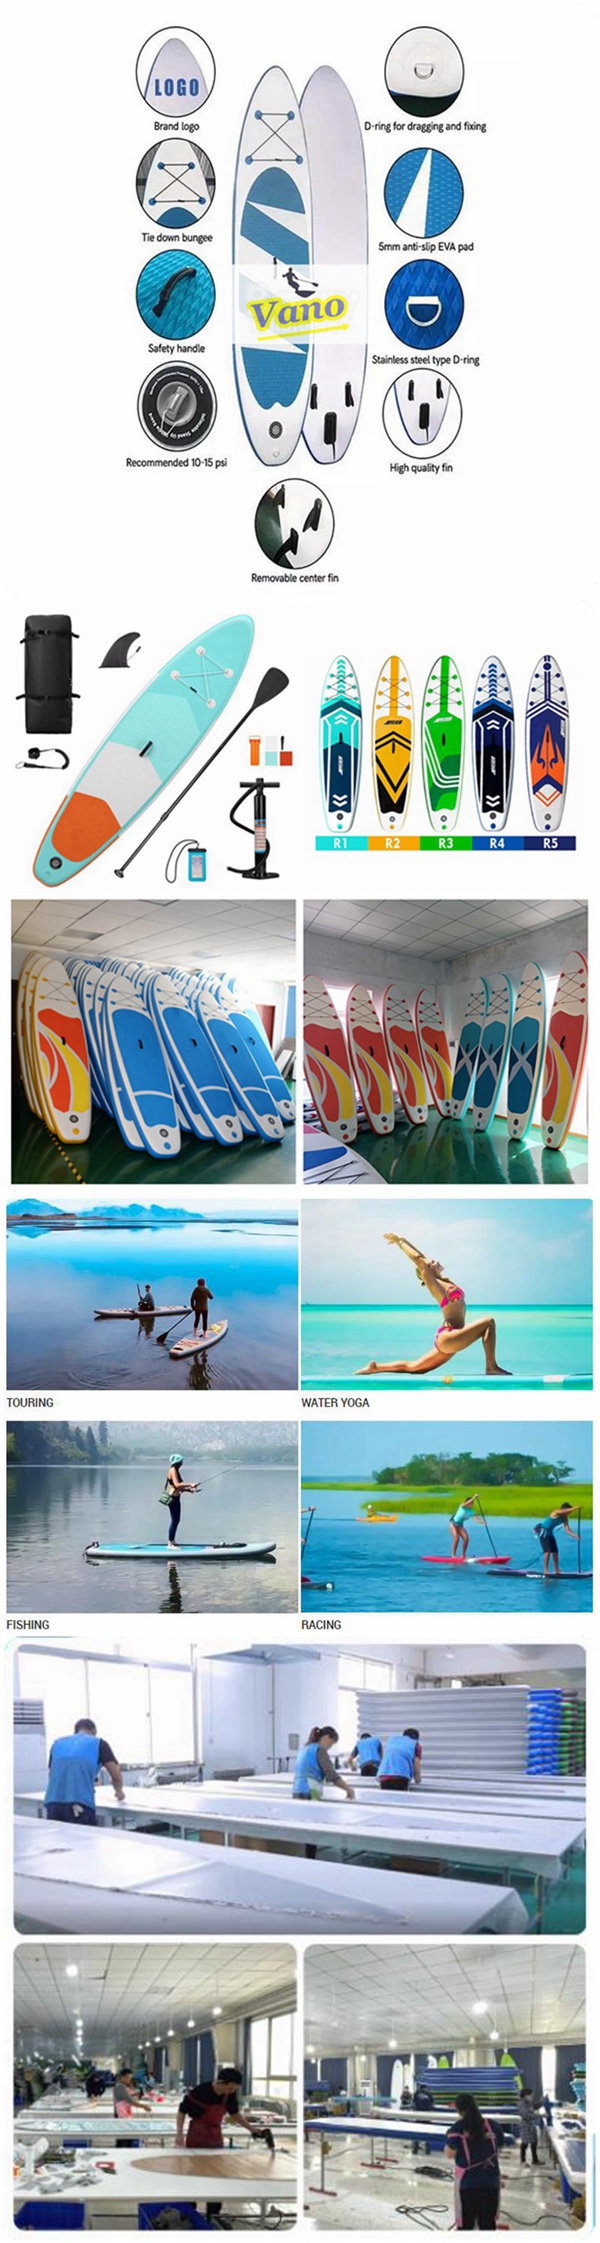 Inflatable Stand Up Paddle Board Manufacturer - MyPaddleBoards.com